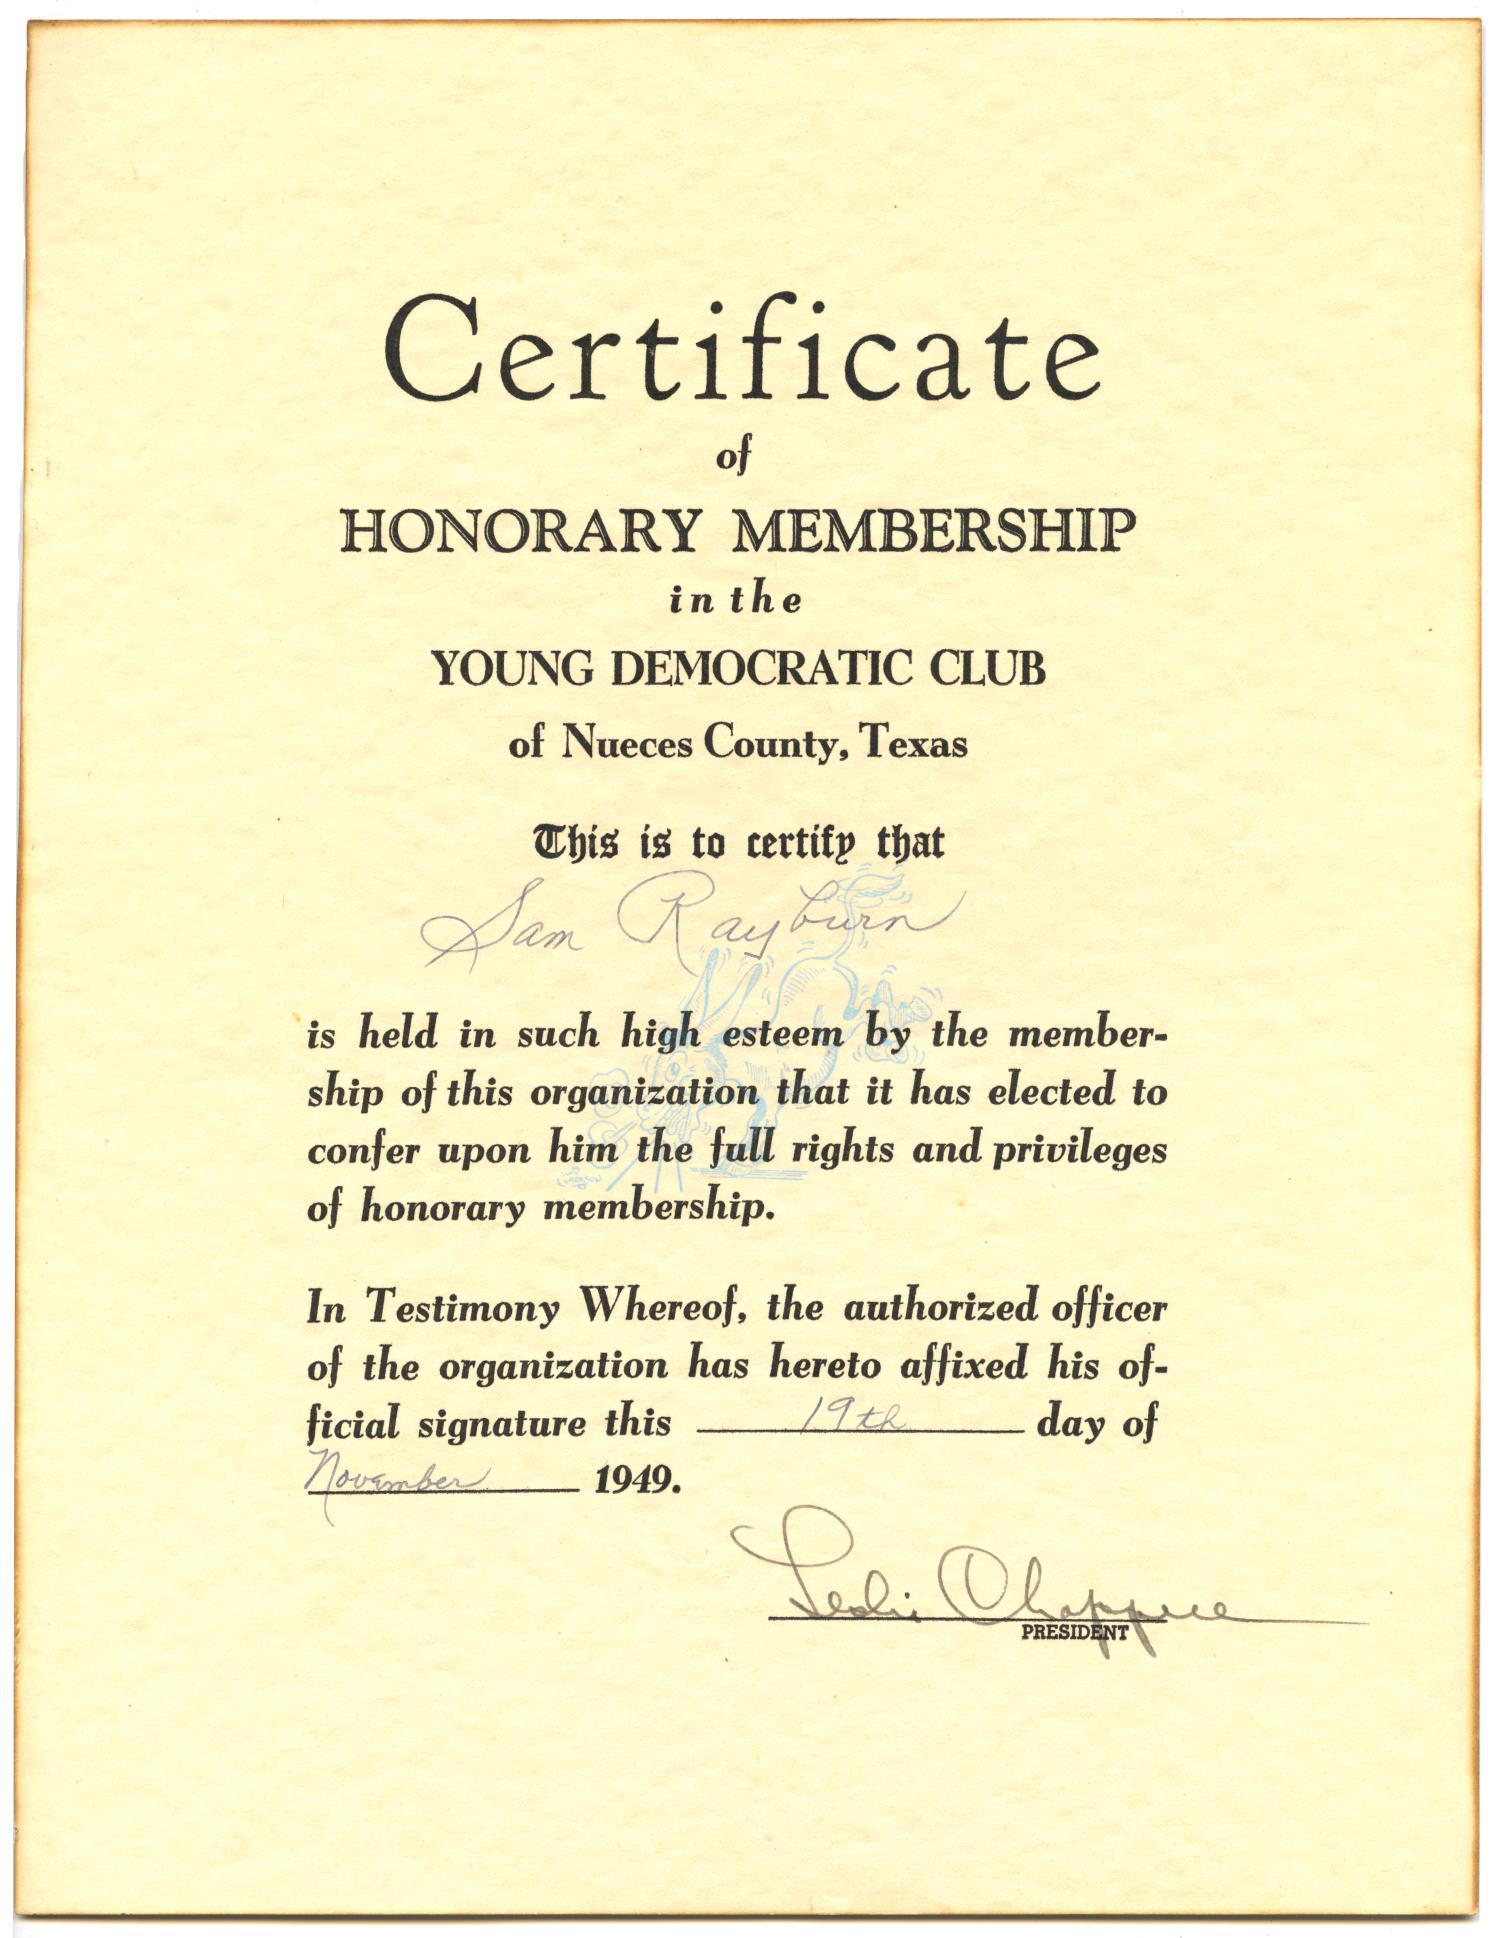 Certificate of Honorary Membership in the Young Democratic Club of Nueces County, Texas
                                                
                                                    [Sequence #]: 1 of 2
                                                